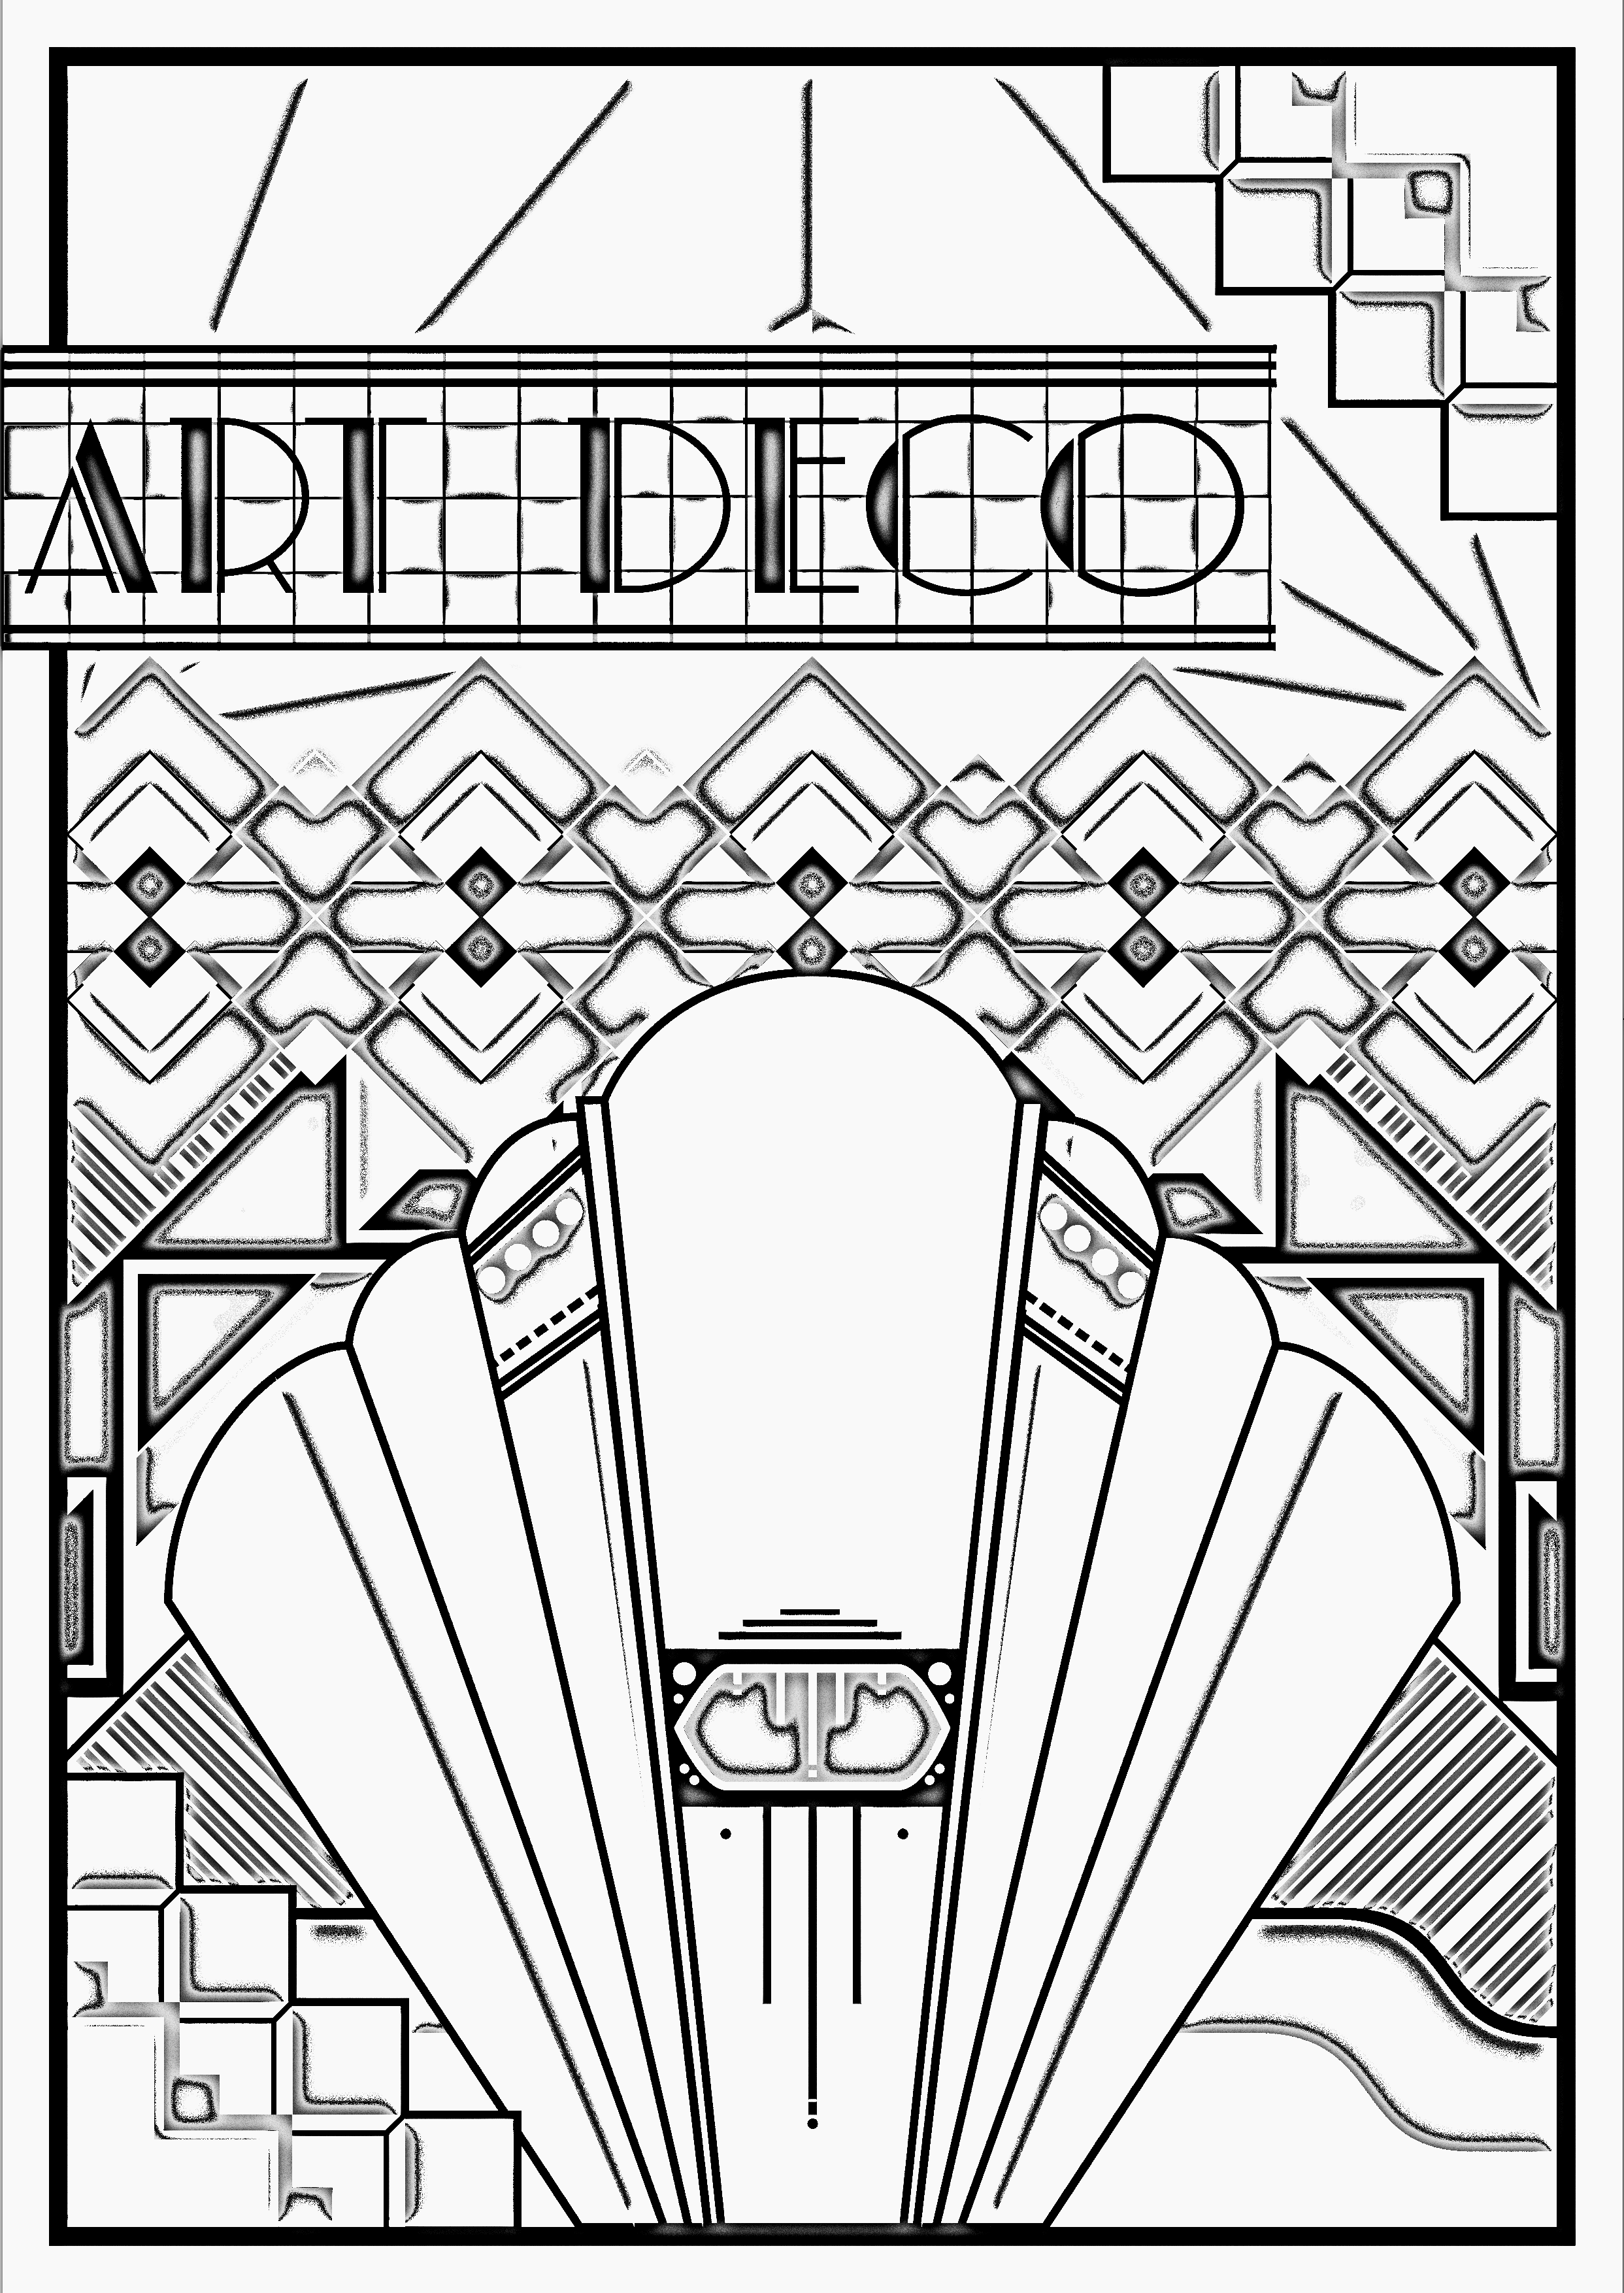 Beautiful Adult coloring page to print and color